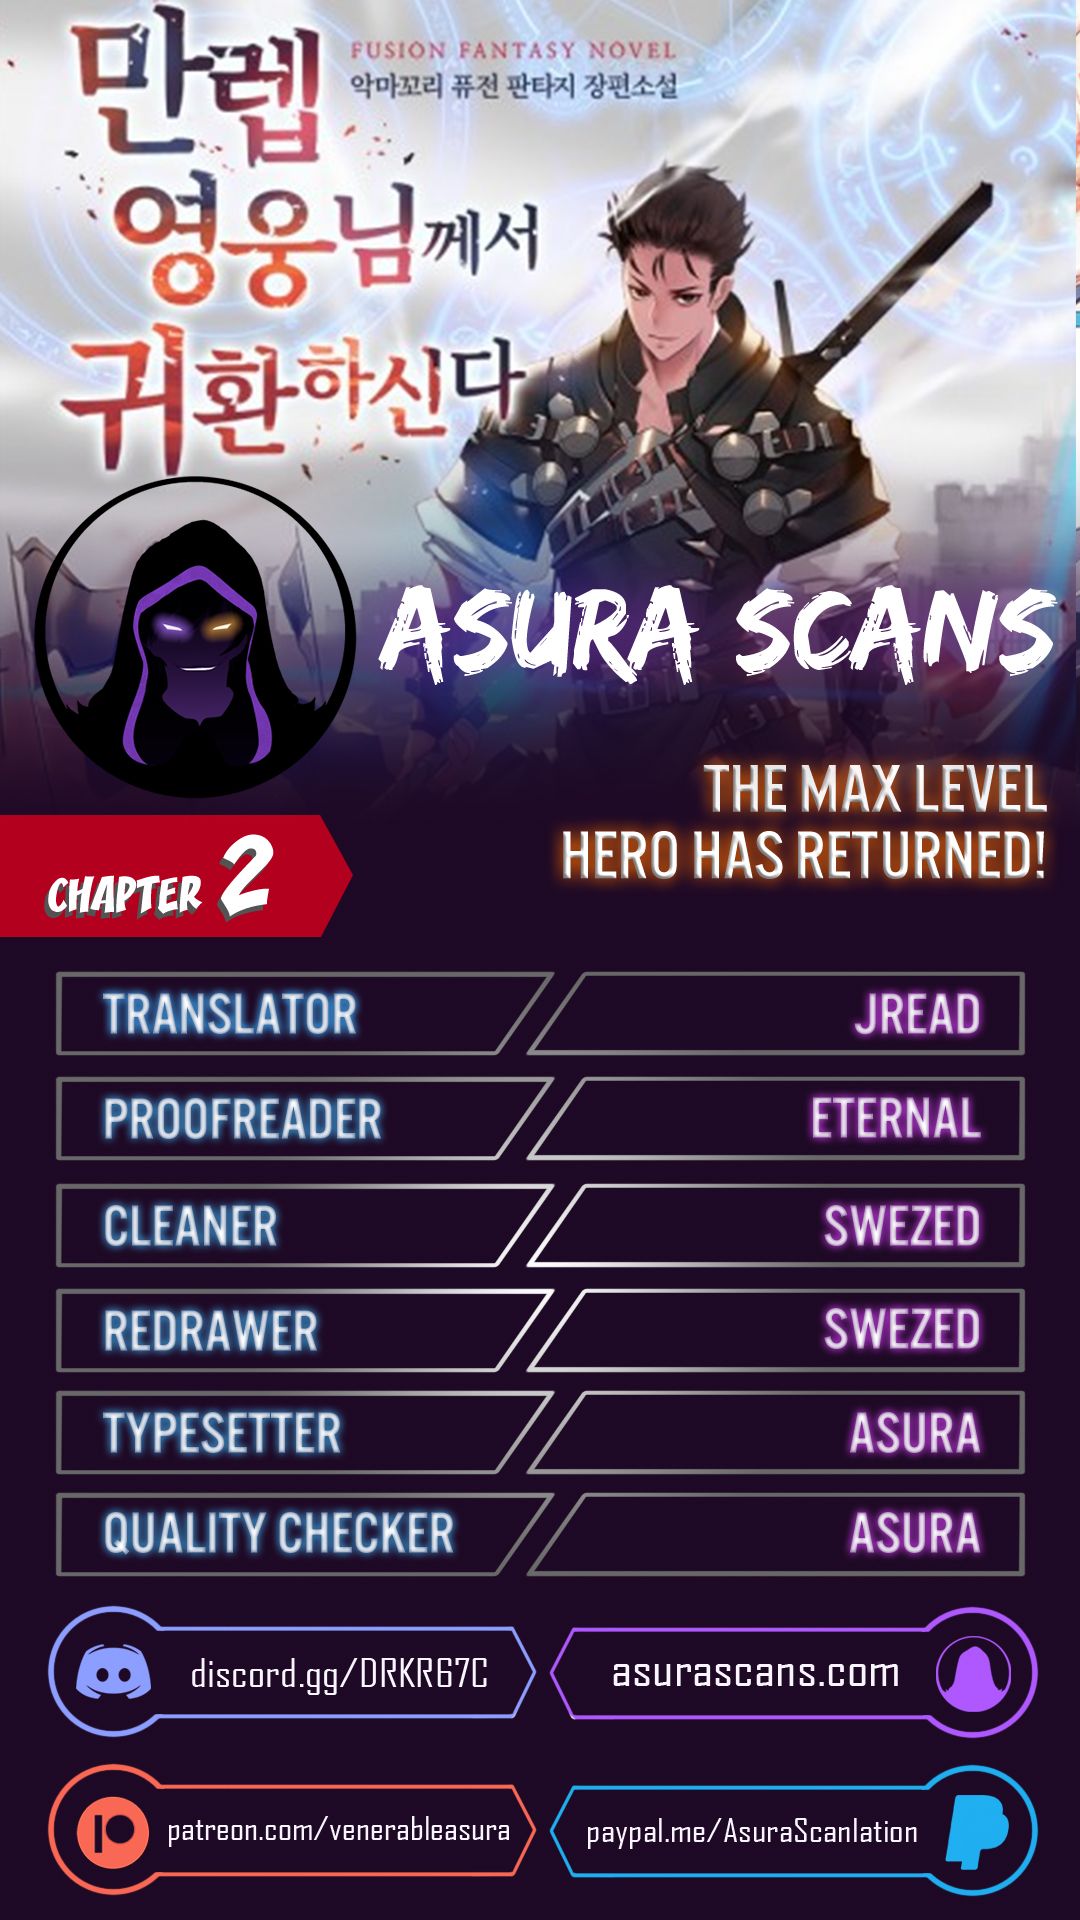 The Max Level Hero has Returned! chapter 2